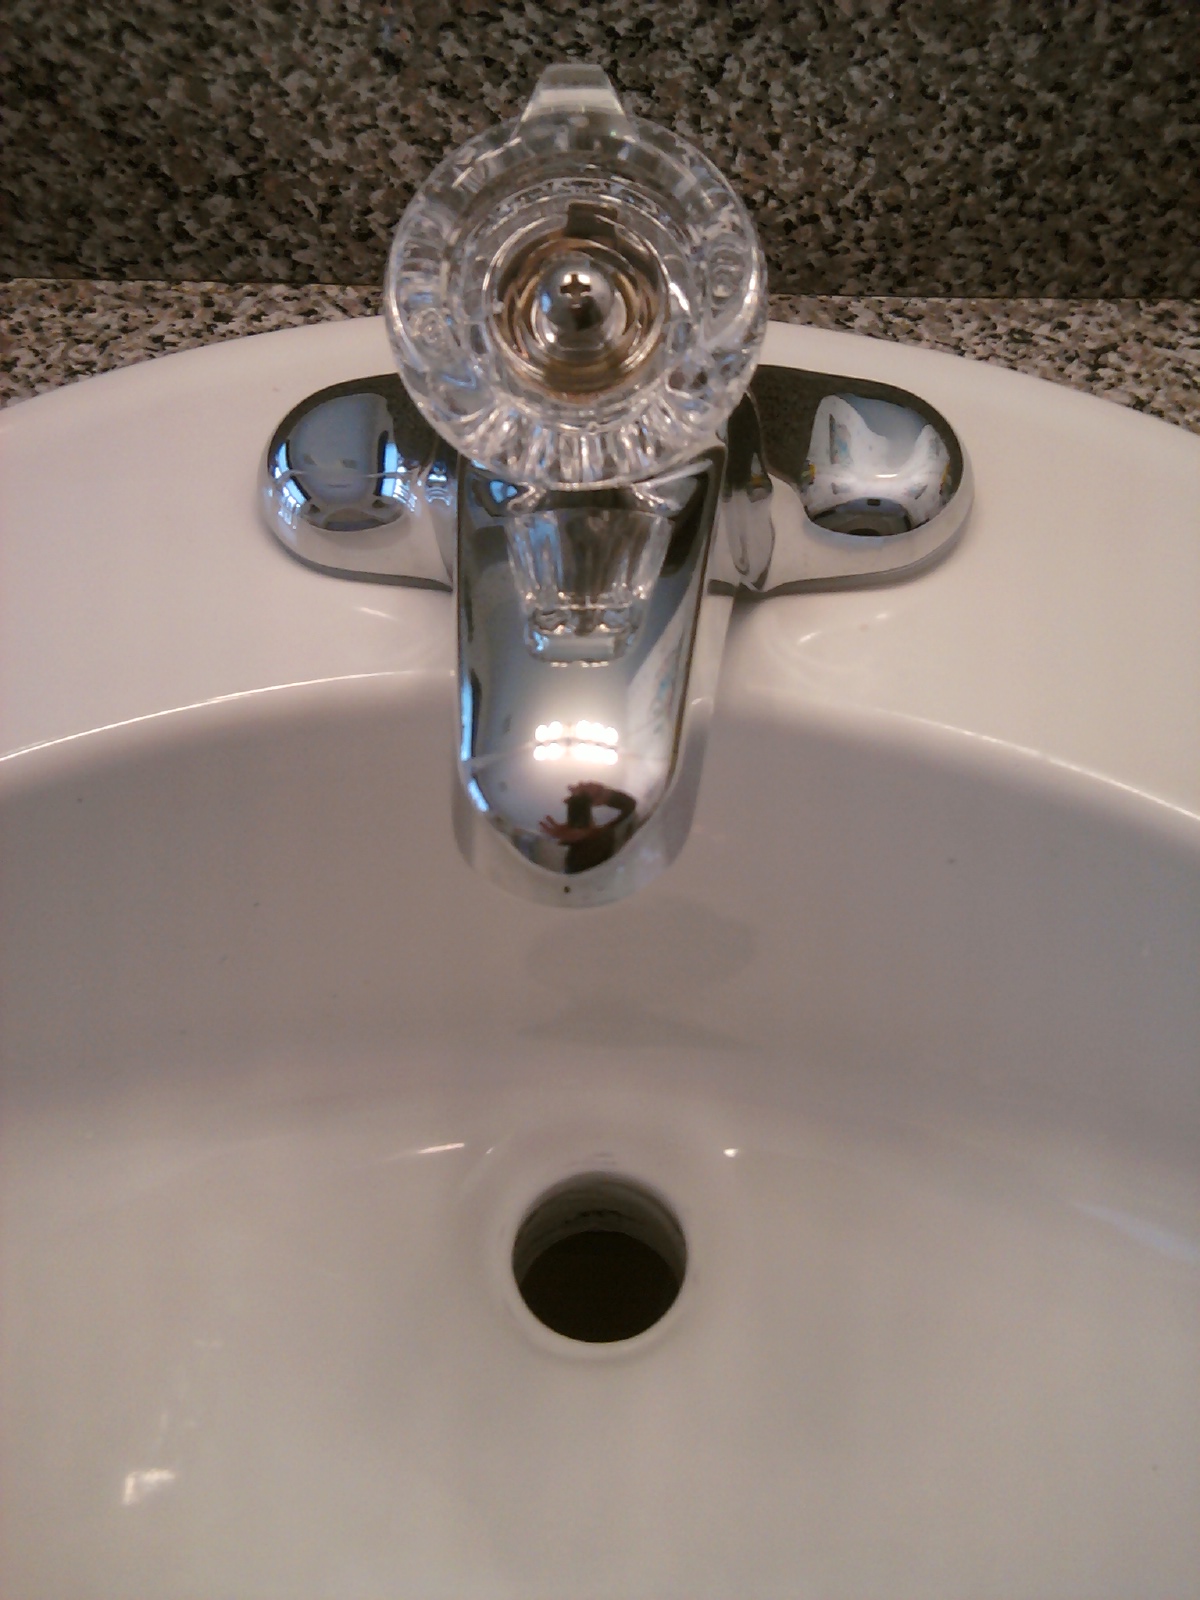 New Bathroom Faucet Installation Completed